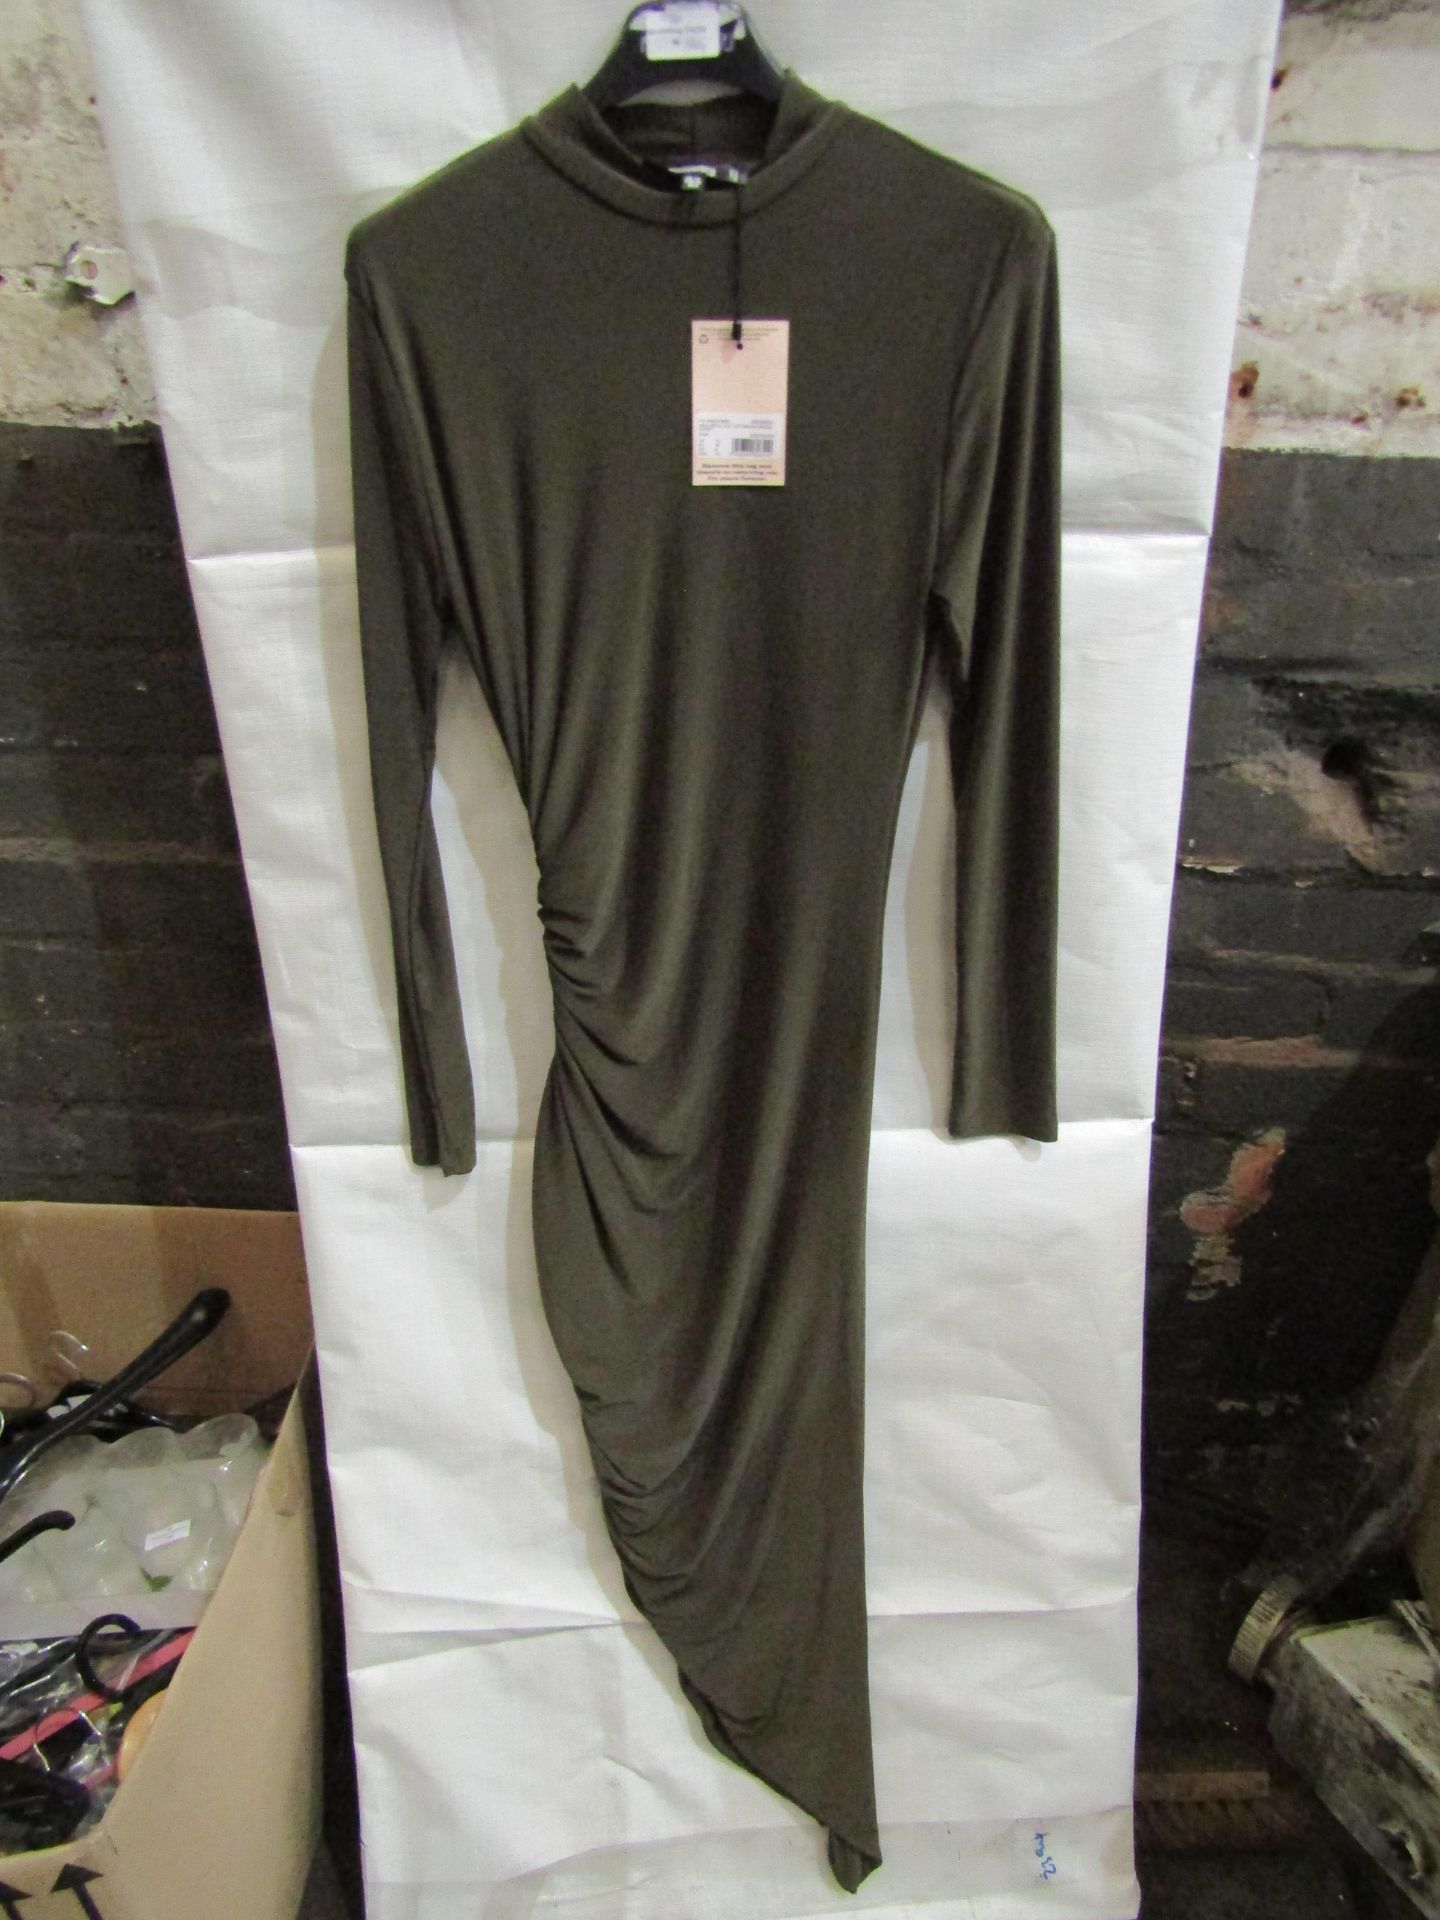 2x Missguided High Neck Cut Out Midaxi Dress Slinky Khaki, Size: 8 - New & Packaged.